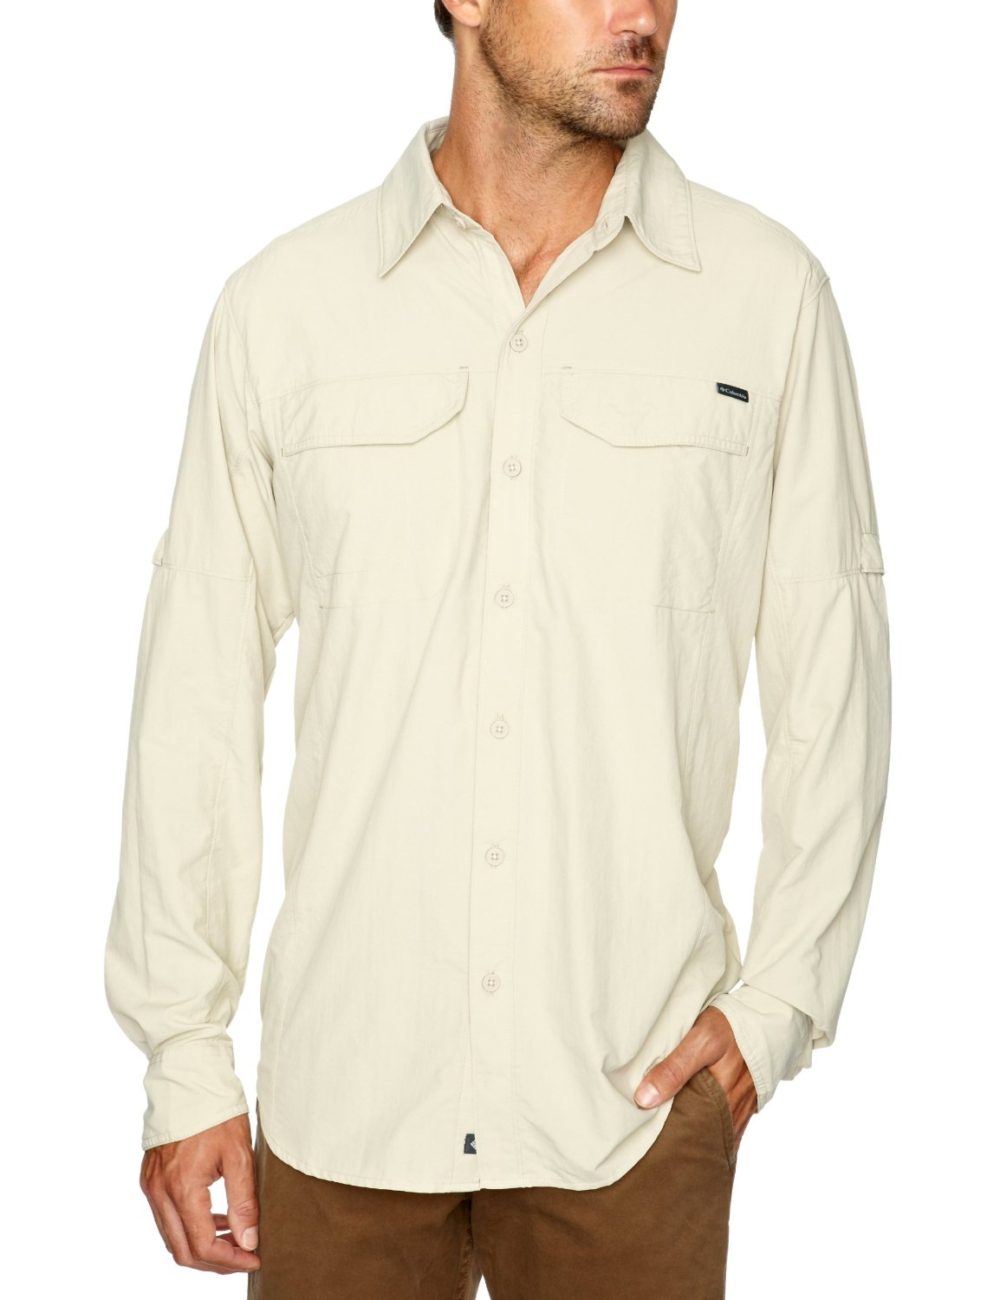 Best Boat Shirt - Boatmodo | The Best Gifts for Boaters